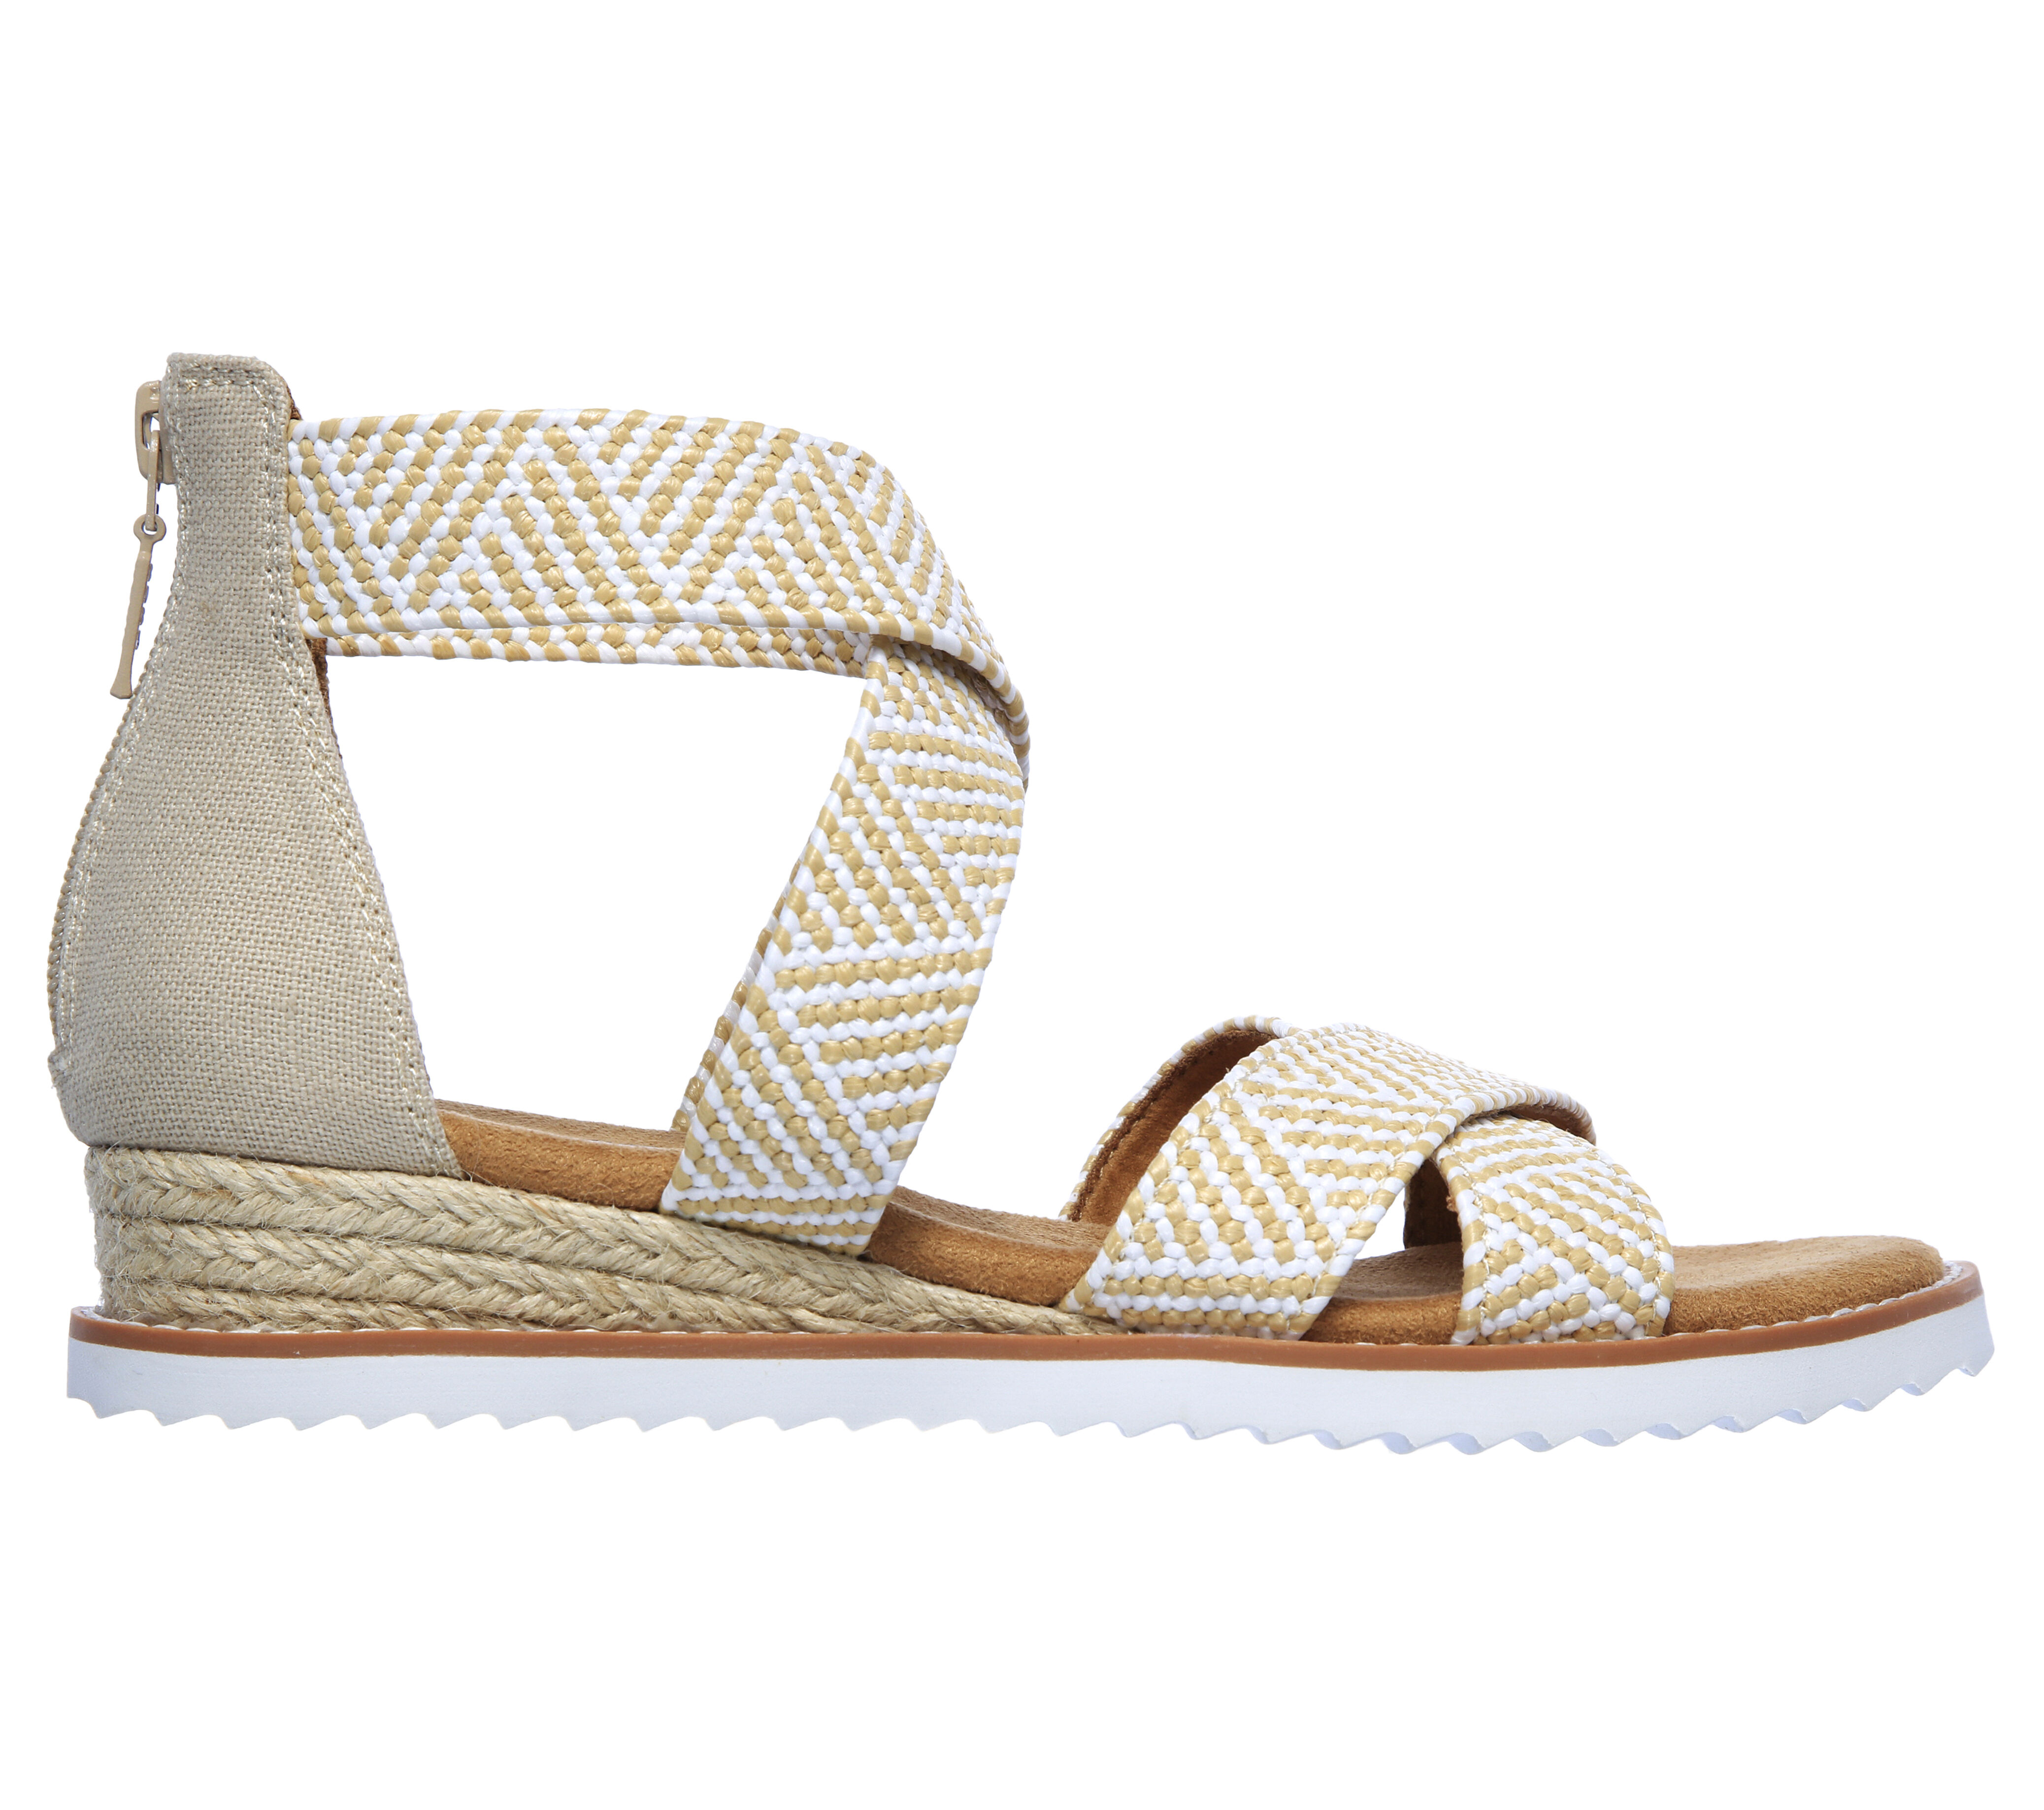 bobs by skechers sandals